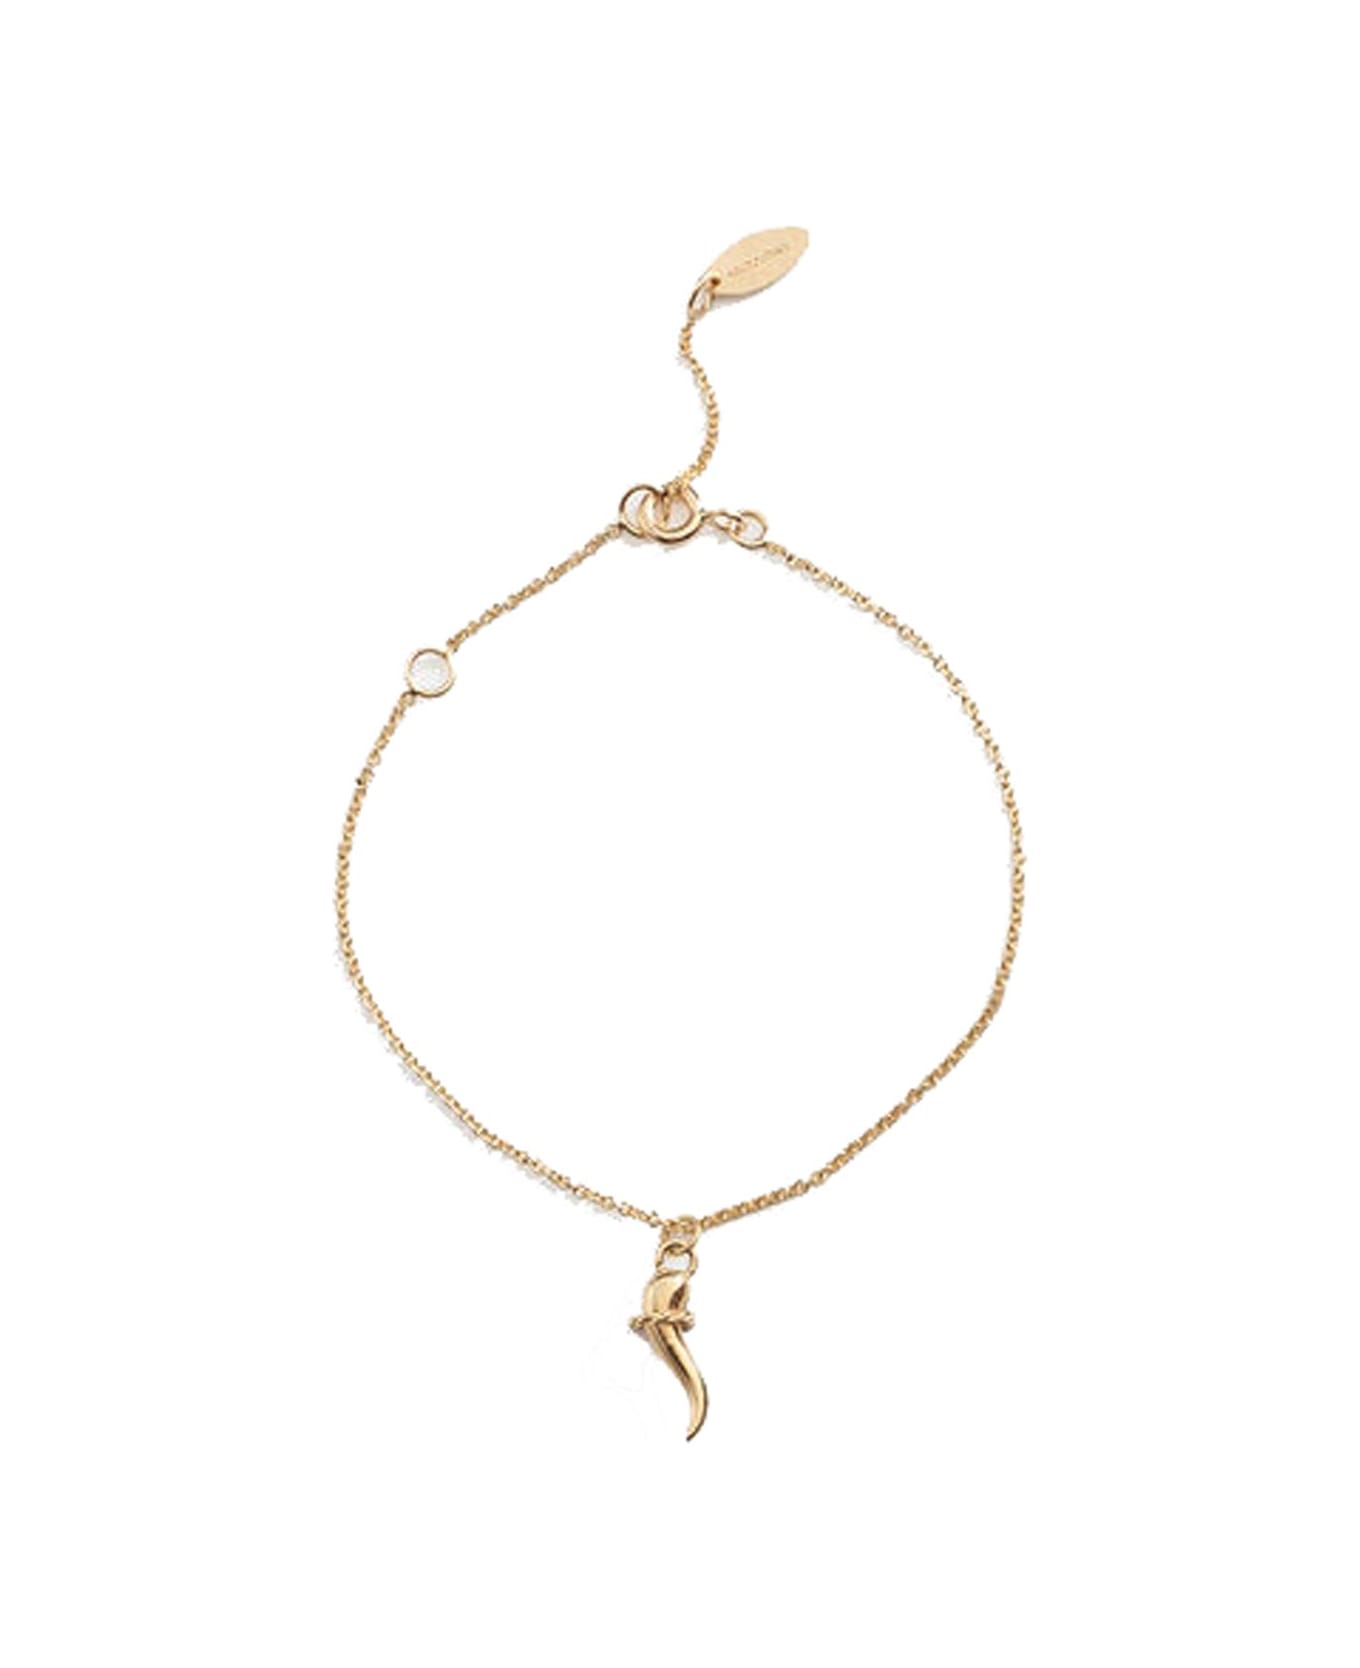 Dolce & Gabbana Bracelet With Good Luck Charm - Gold アクセサリー＆ギフト